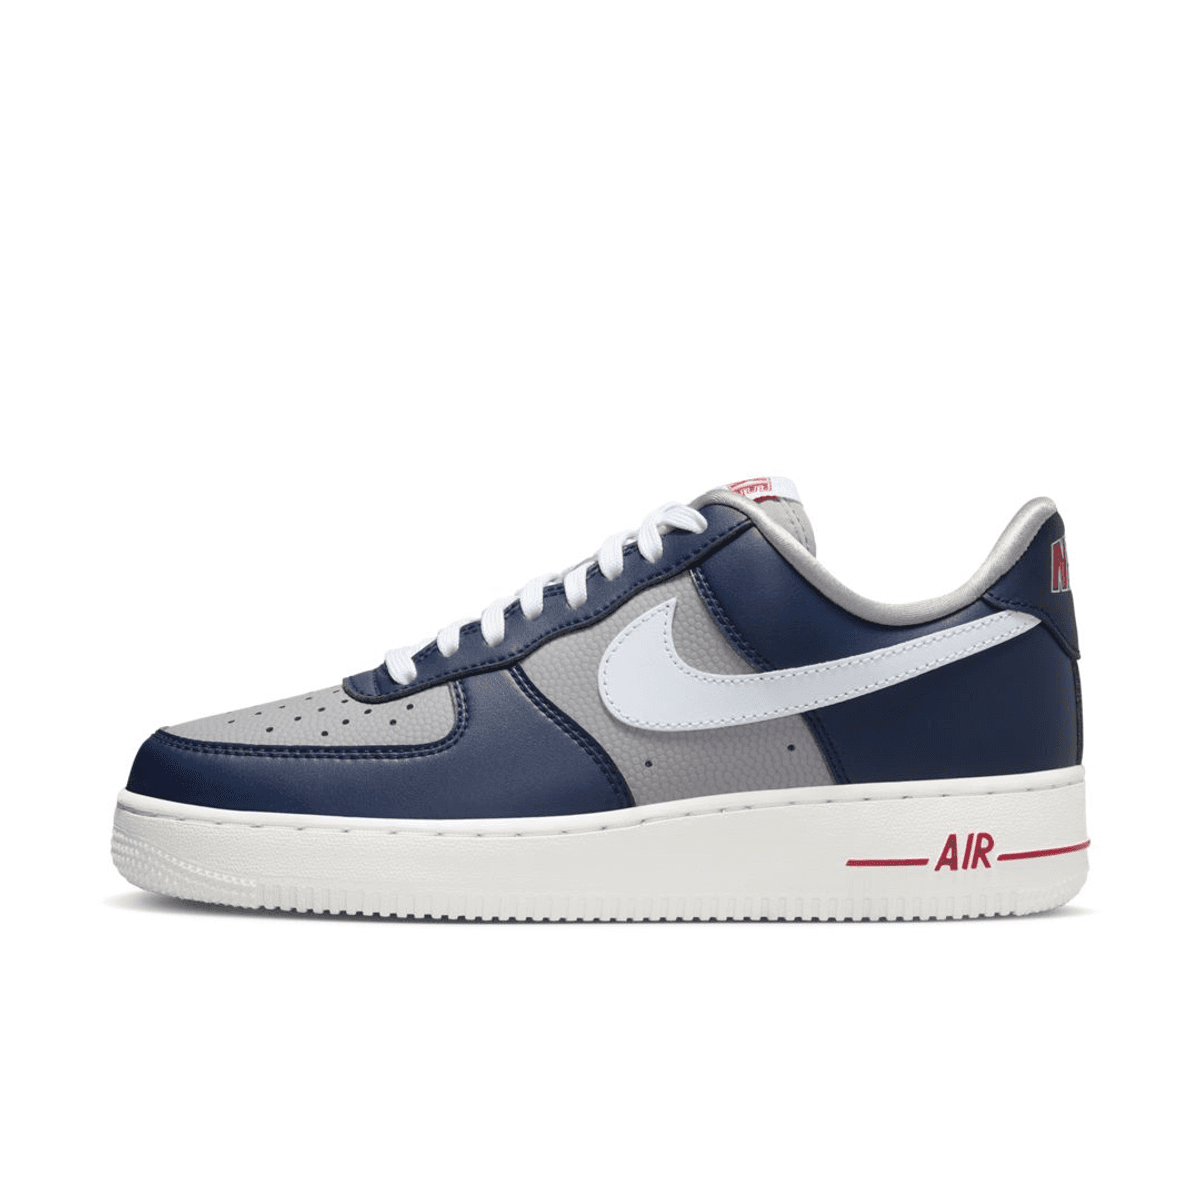 Official Images Of The Upcoming Nike Air Force 1 Low "Be True To Her School" (W)